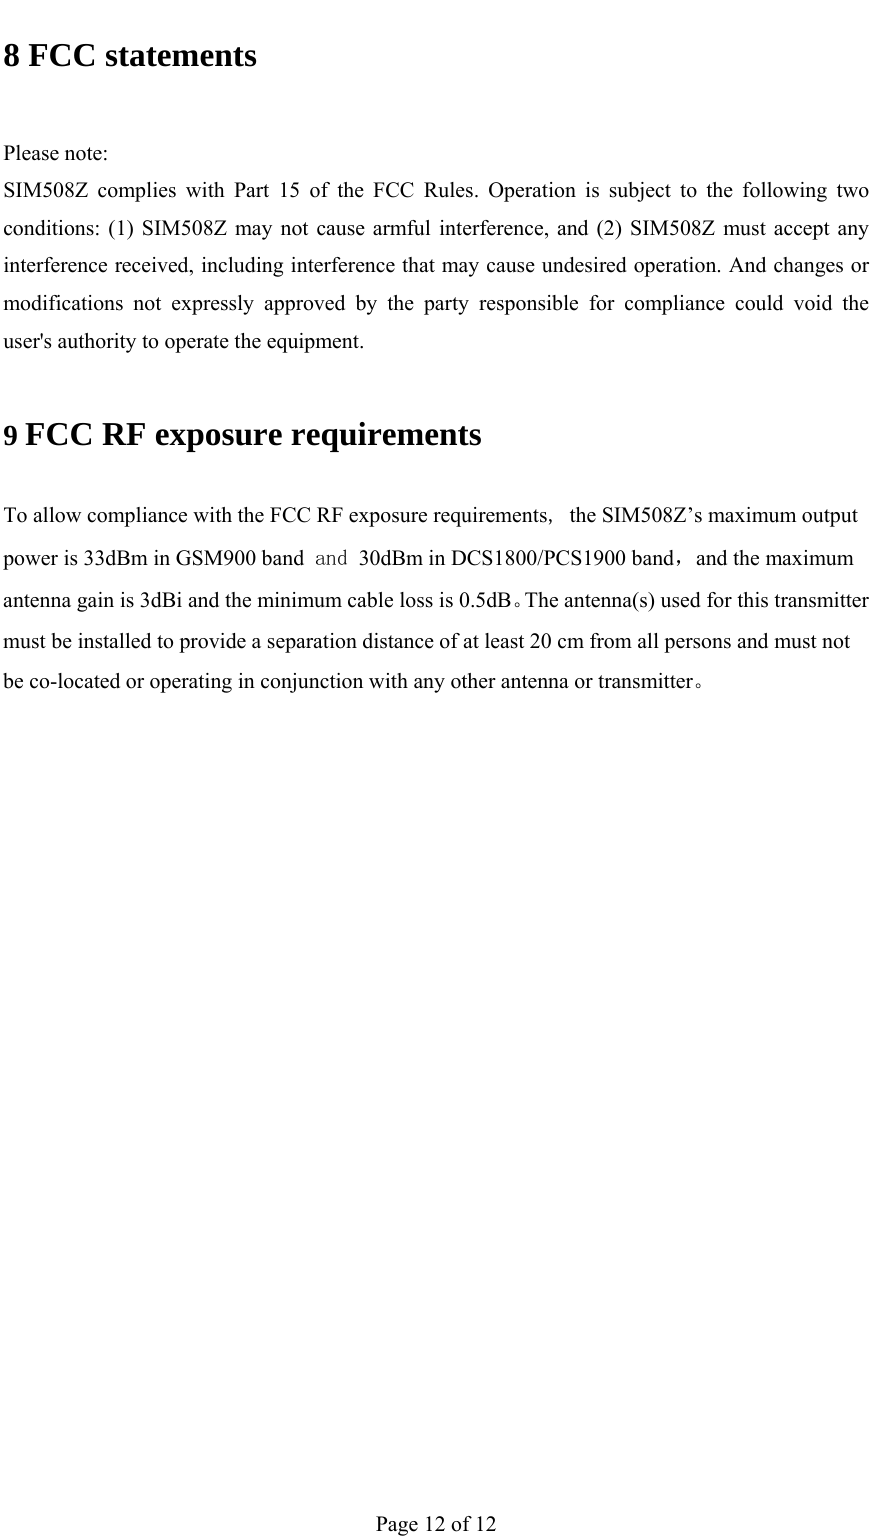                                           8 FCC statements  Please note: SIM508Z complies with Part 15 of the FCC Rules. Operation is subject to the following two conditions: (1) SIM508Z may not cause armful interference, and (2) SIM508Z must accept any interference received, including interference that may cause undesired operation. And changes or modifications not expressly approved by the party responsible for compliance could void the user&apos;s authority to operate the equipment. 9 FCC RF exposure requirements To allow compliance with the FCC RF exposure requirements, the SIM508Z’s maximum output power is 33dBm in GSM900 band and 30dBm in DCS1800/PCS1900 band，and the maximum antenna gain is 3dBi and the minimum cable loss is 0.5dB。The antenna(s) used for this transmitter must be installed to provide a separation distance of at least 20 cm from all persons and must not be co-located or operating in conjunction with any other antenna or transmitter。    Page 12 of 12 